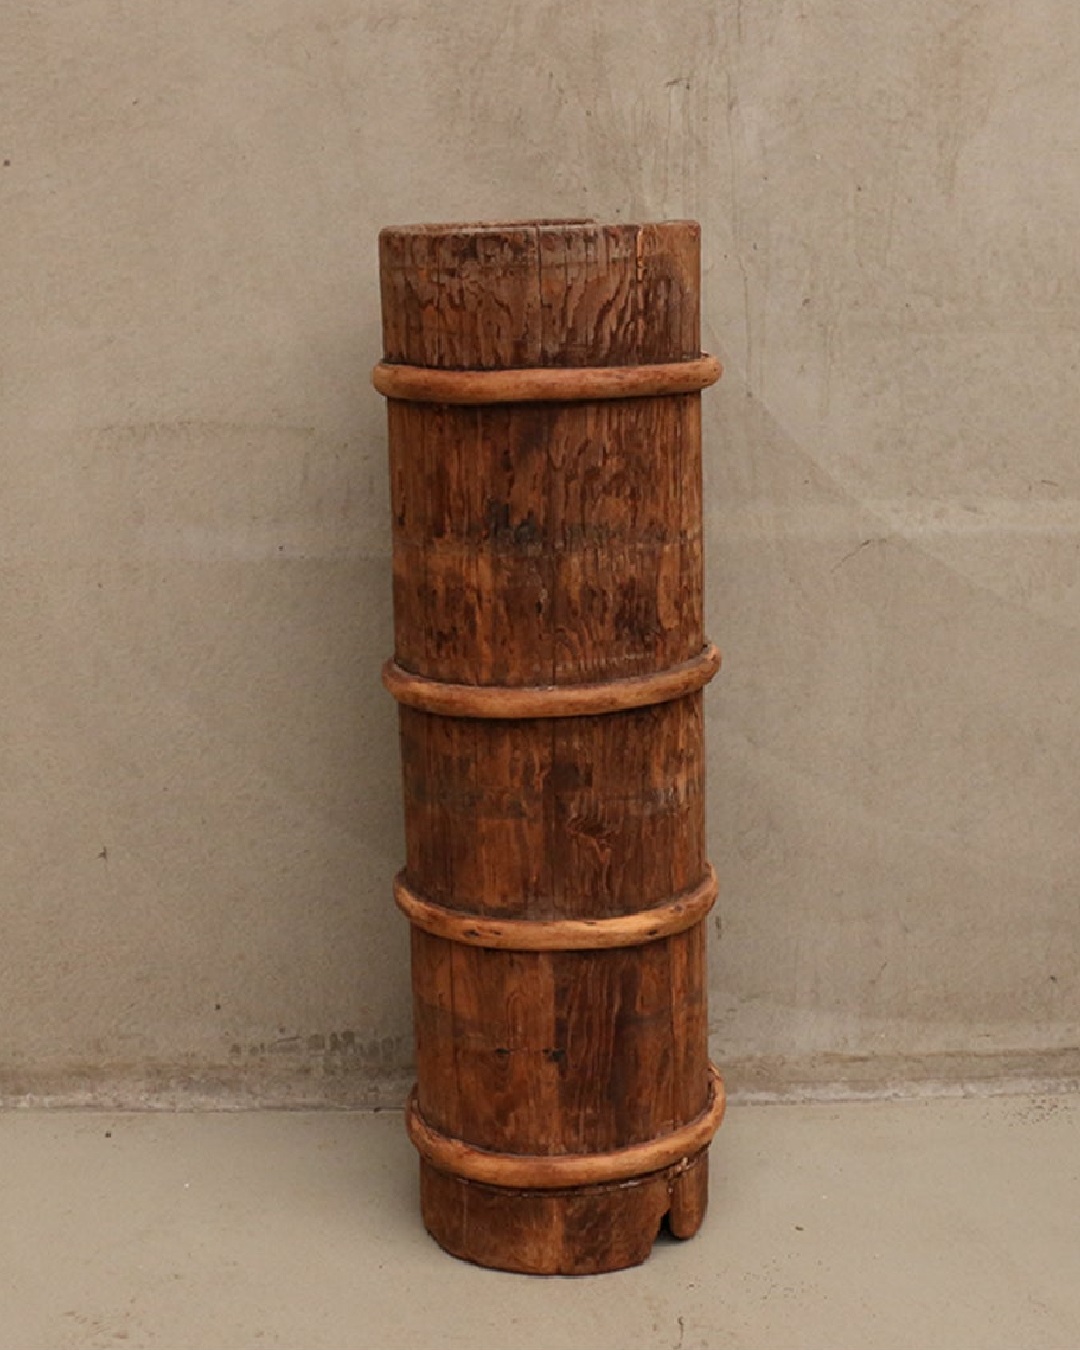 Antique wooden bucket from markets in China